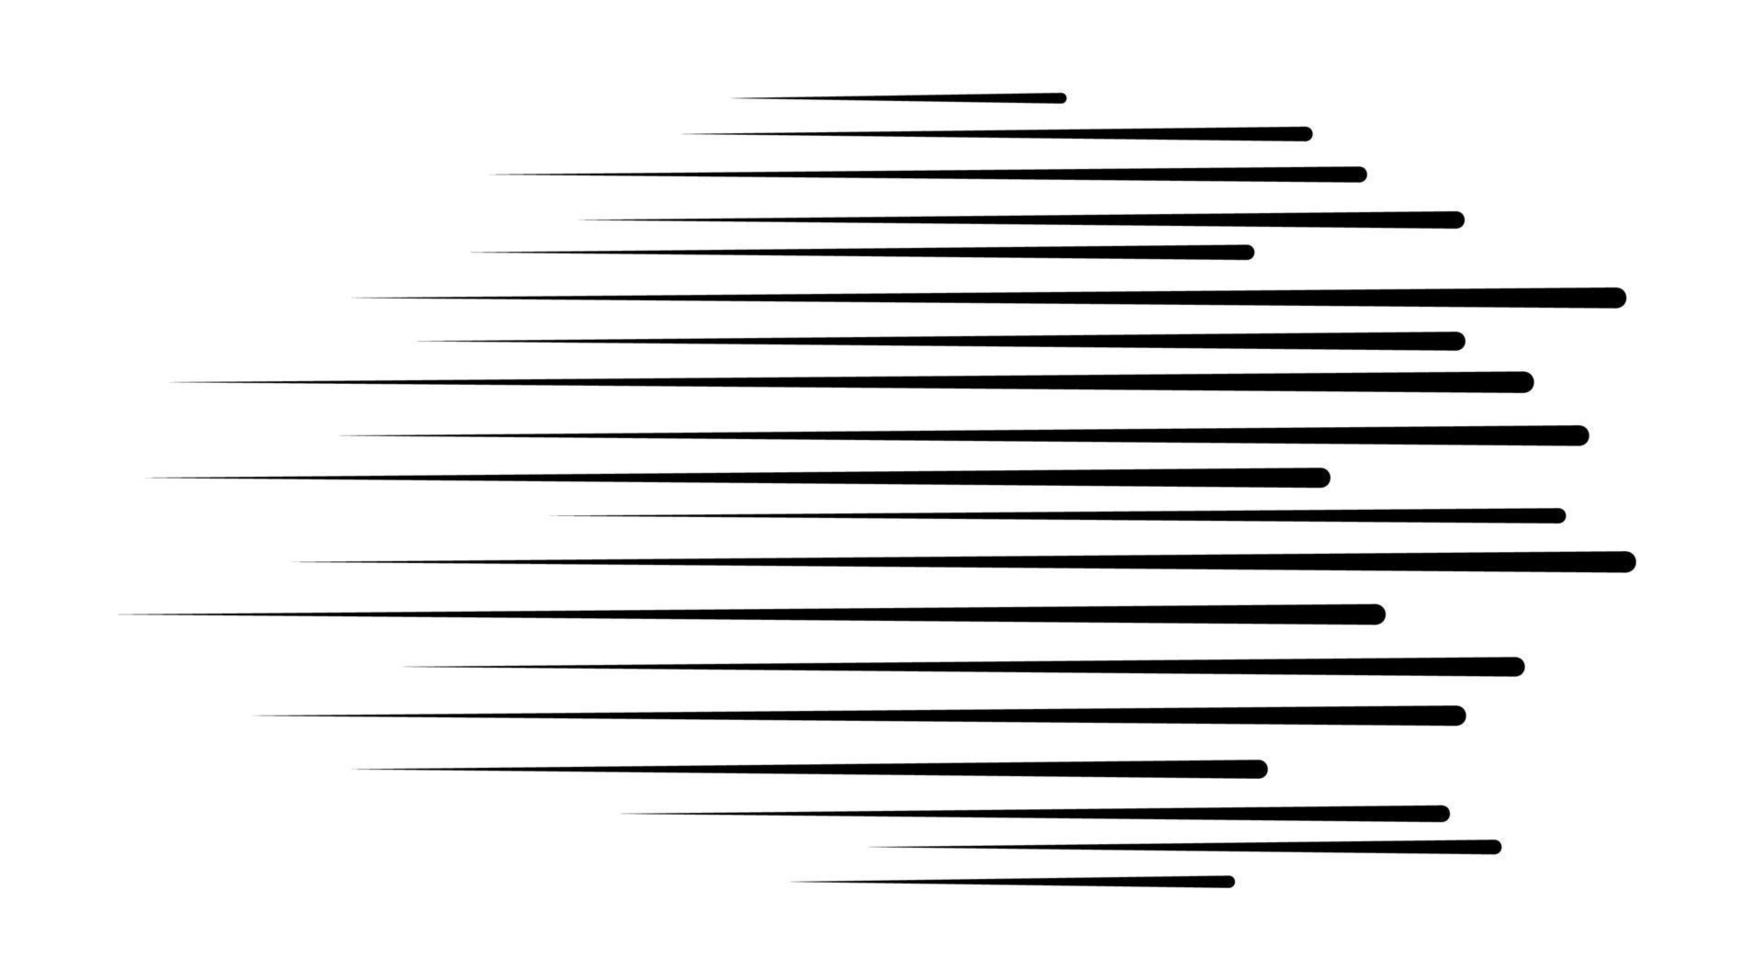 Horizontal speed lines for comic books. Manga, anime graphic speed striped texture. Horizontal fast motion lines for comic books. Vector illustration isolated on white background